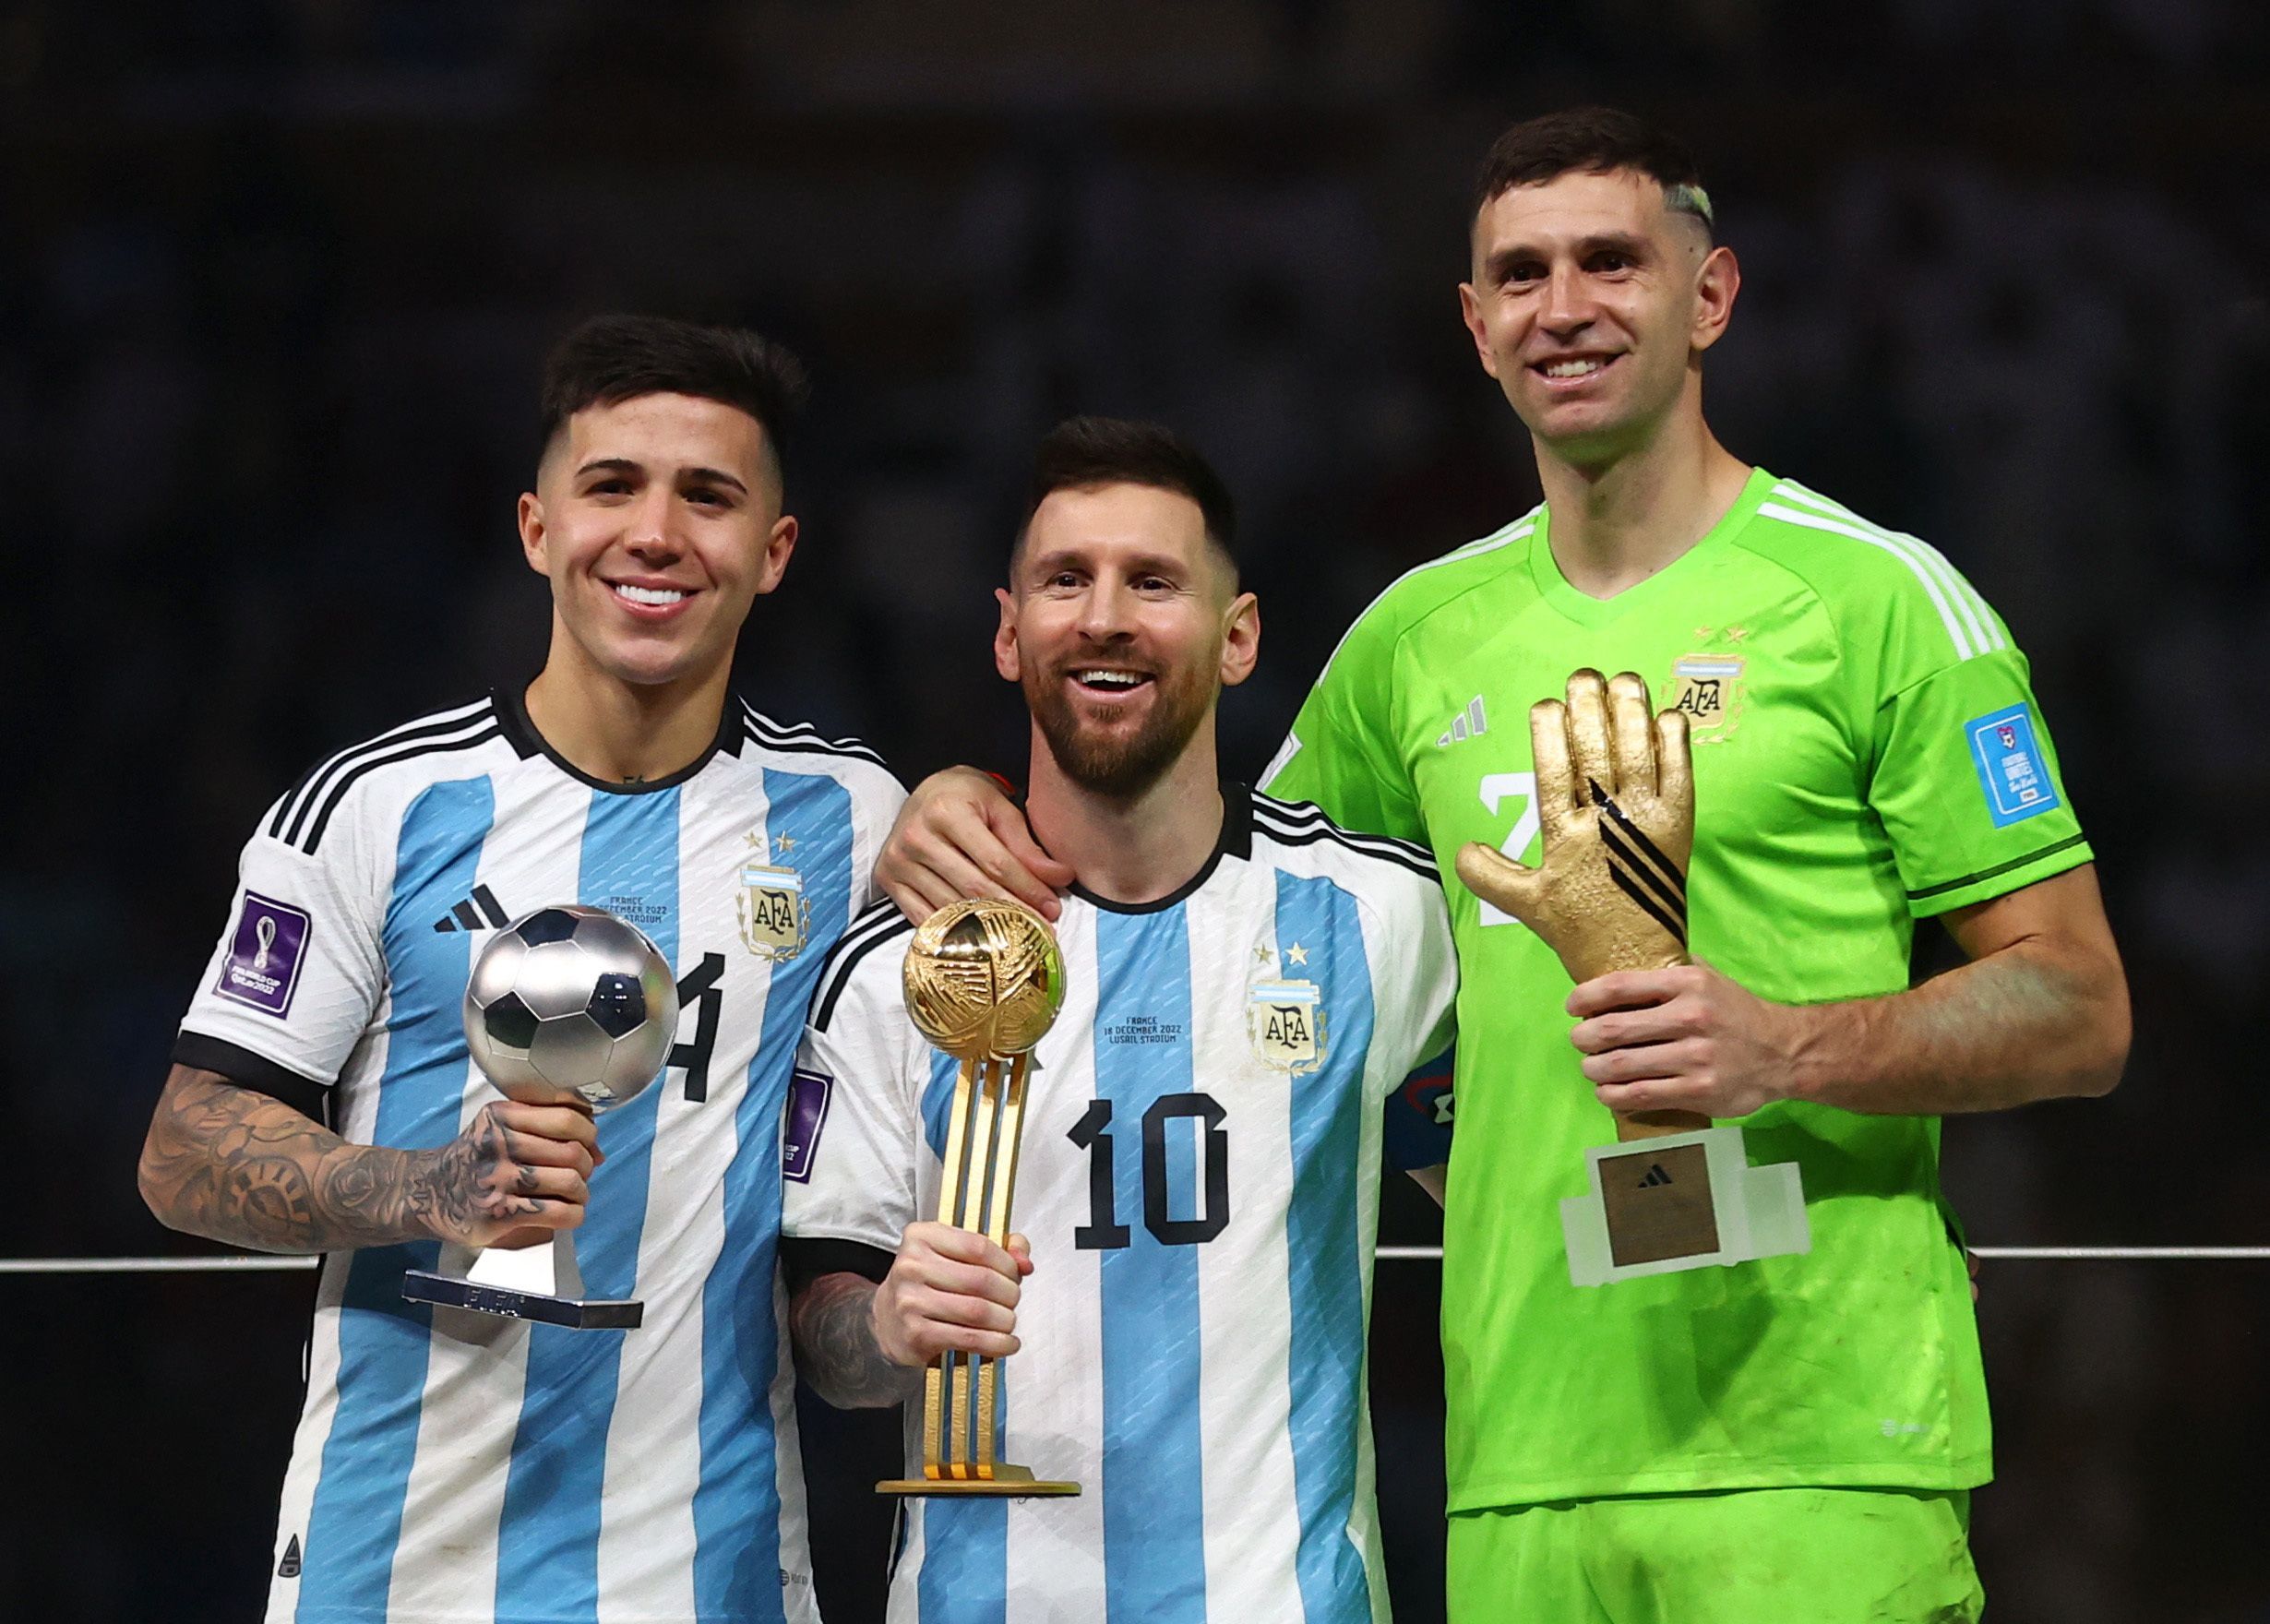 Soccer Football - FIFA World Cup Qatar 2022 - Final - Argentina v France - Lusail Stadium, Lusail, Qatar - December 18, 2022 Best Young Player winner Argentina's Enzo Fernandez, Golden Ball winner Argentina's Lionel Messi and Golden Glove winner Argentina's Emiliano Martinez pose with the trophies REUTERS/Carl Recine